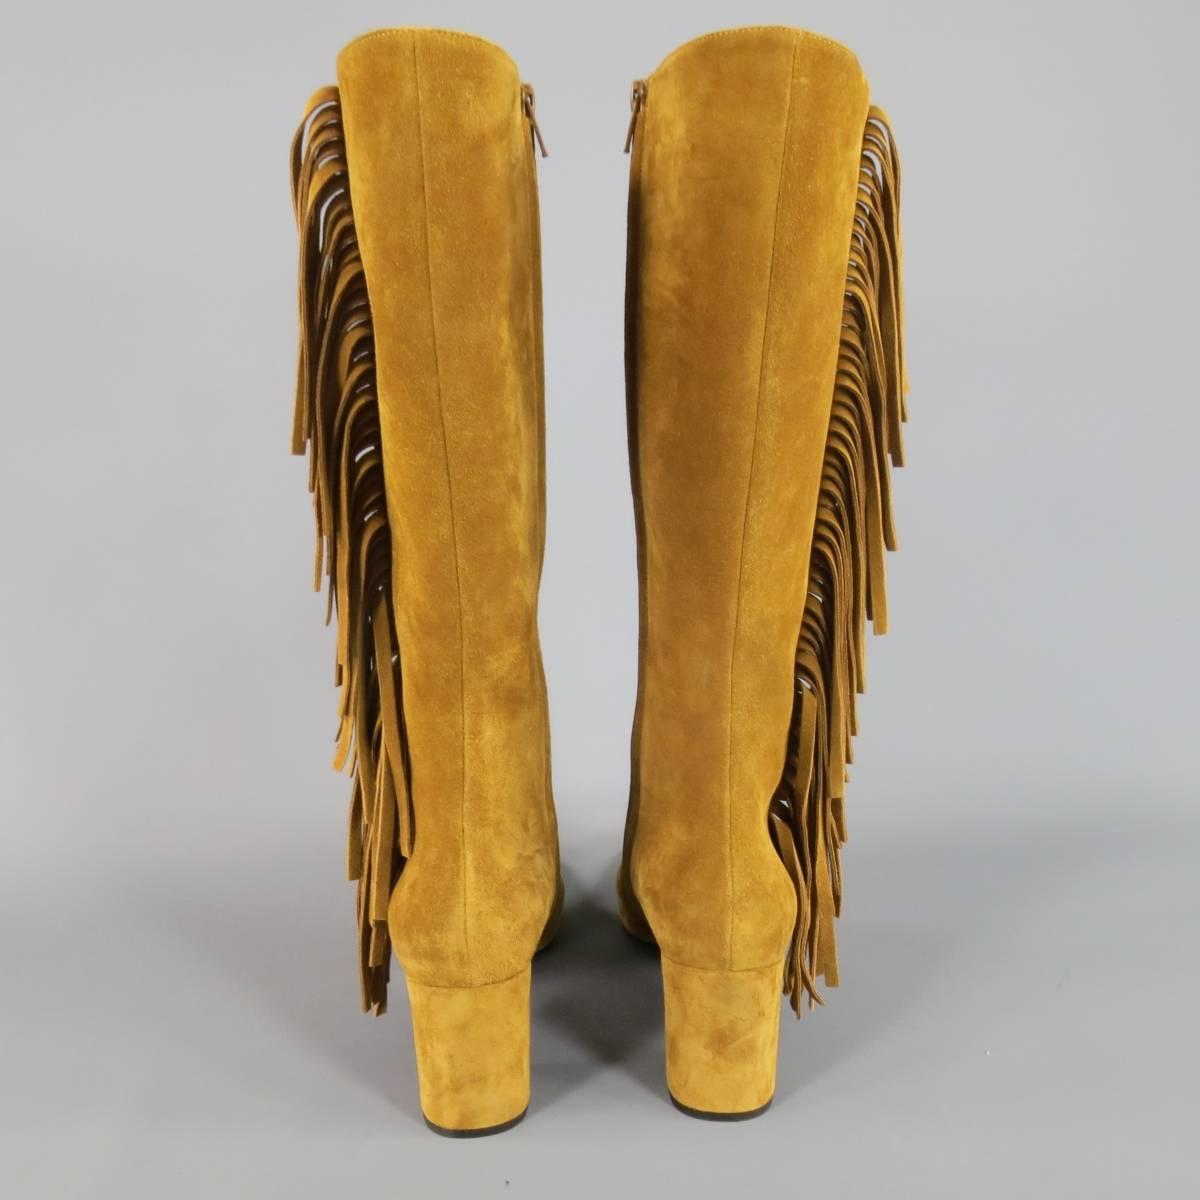 Fabulous SAINT LAURENT by Hedi Slimane knee high boots in soft tan suede featuring a chunky covered heel, internal zip closure, and fringe side. Made in Italy.
 
Excellent Pre-Owned Condition.
Marked: IT 38.5
 
Heel: 3 in.
Height: 14 in.